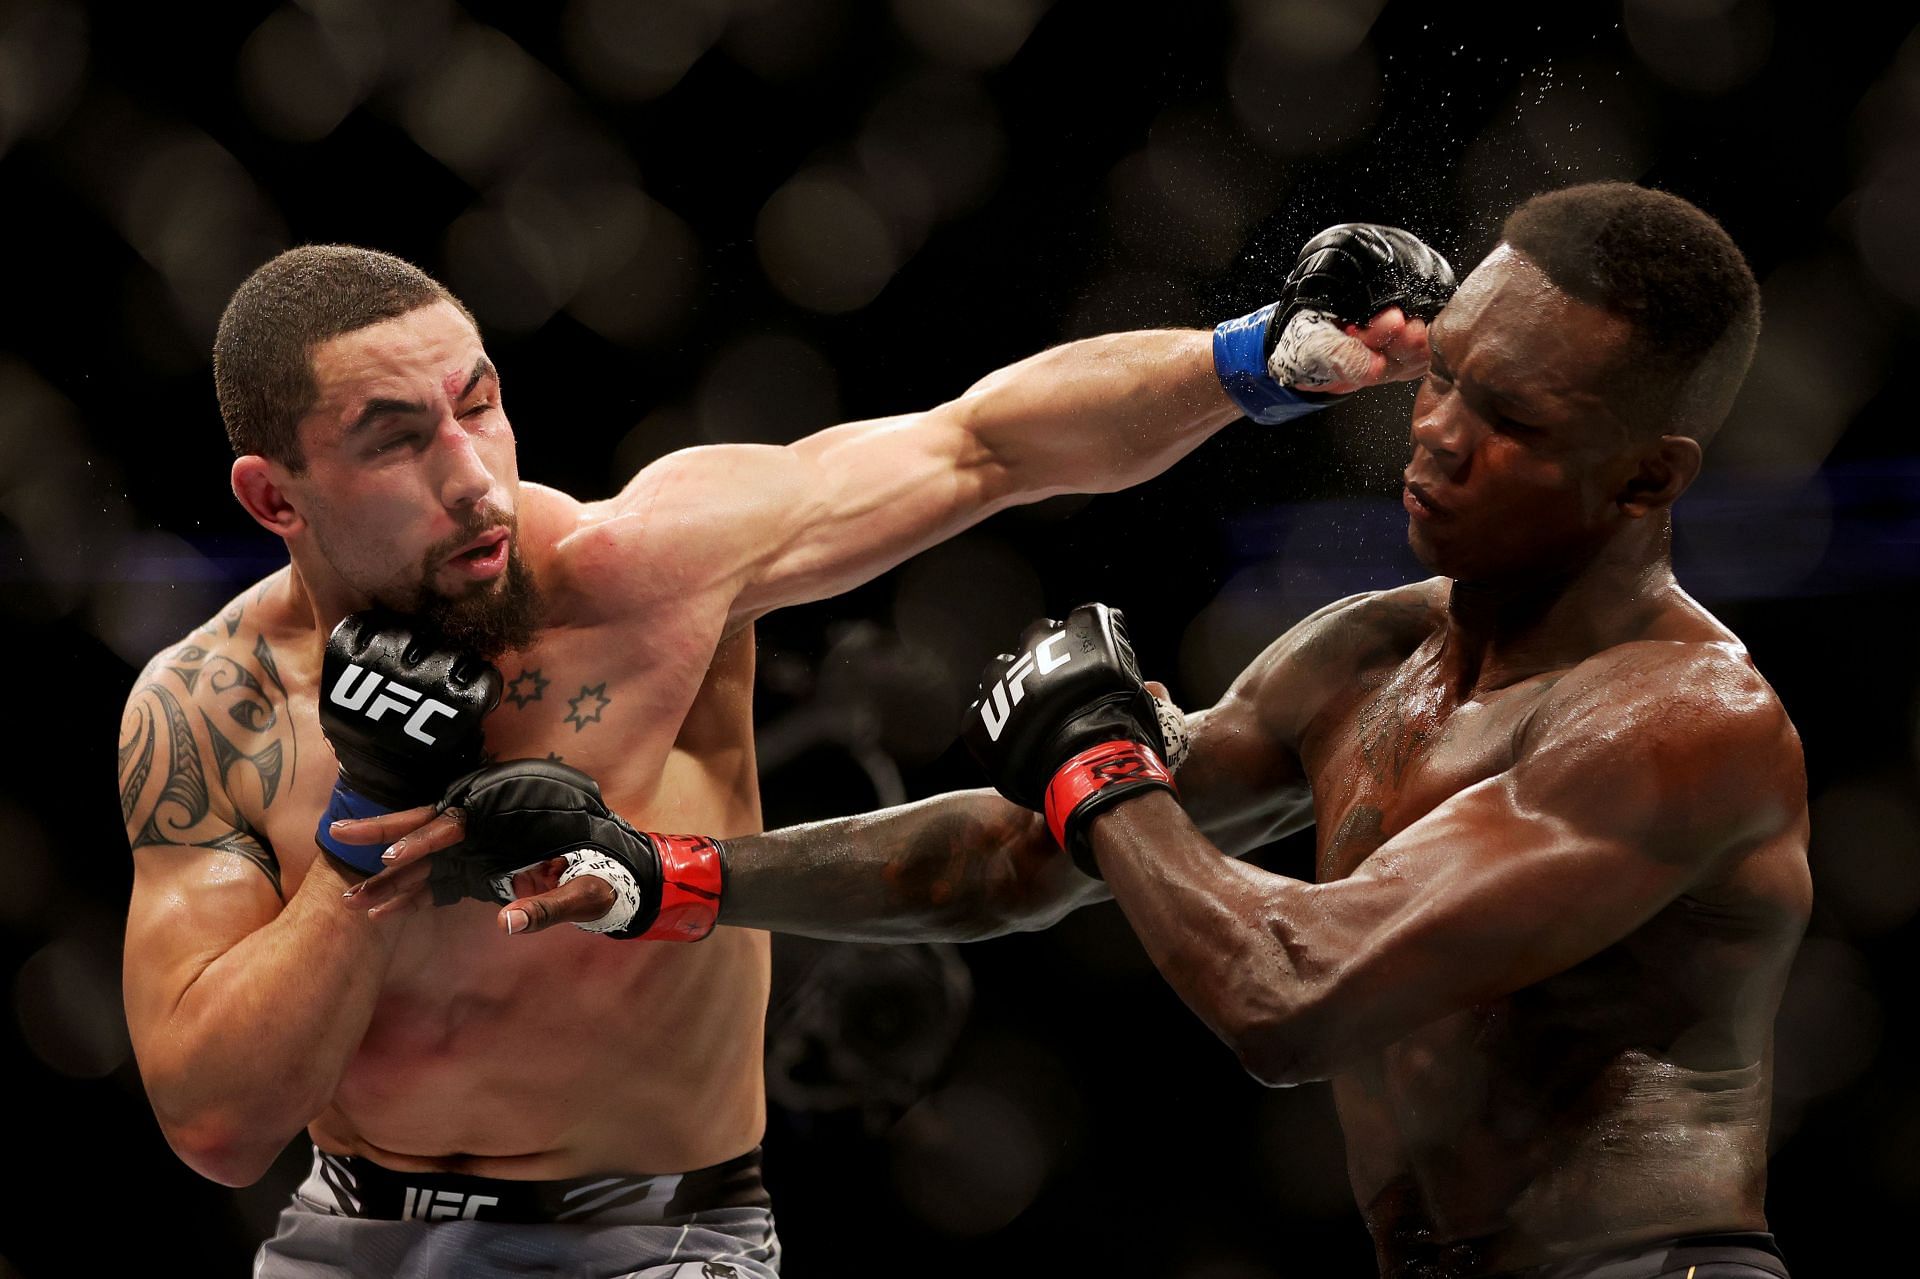 Robert Whittaker might still be middleweight champion were it not for Israel Adesanya